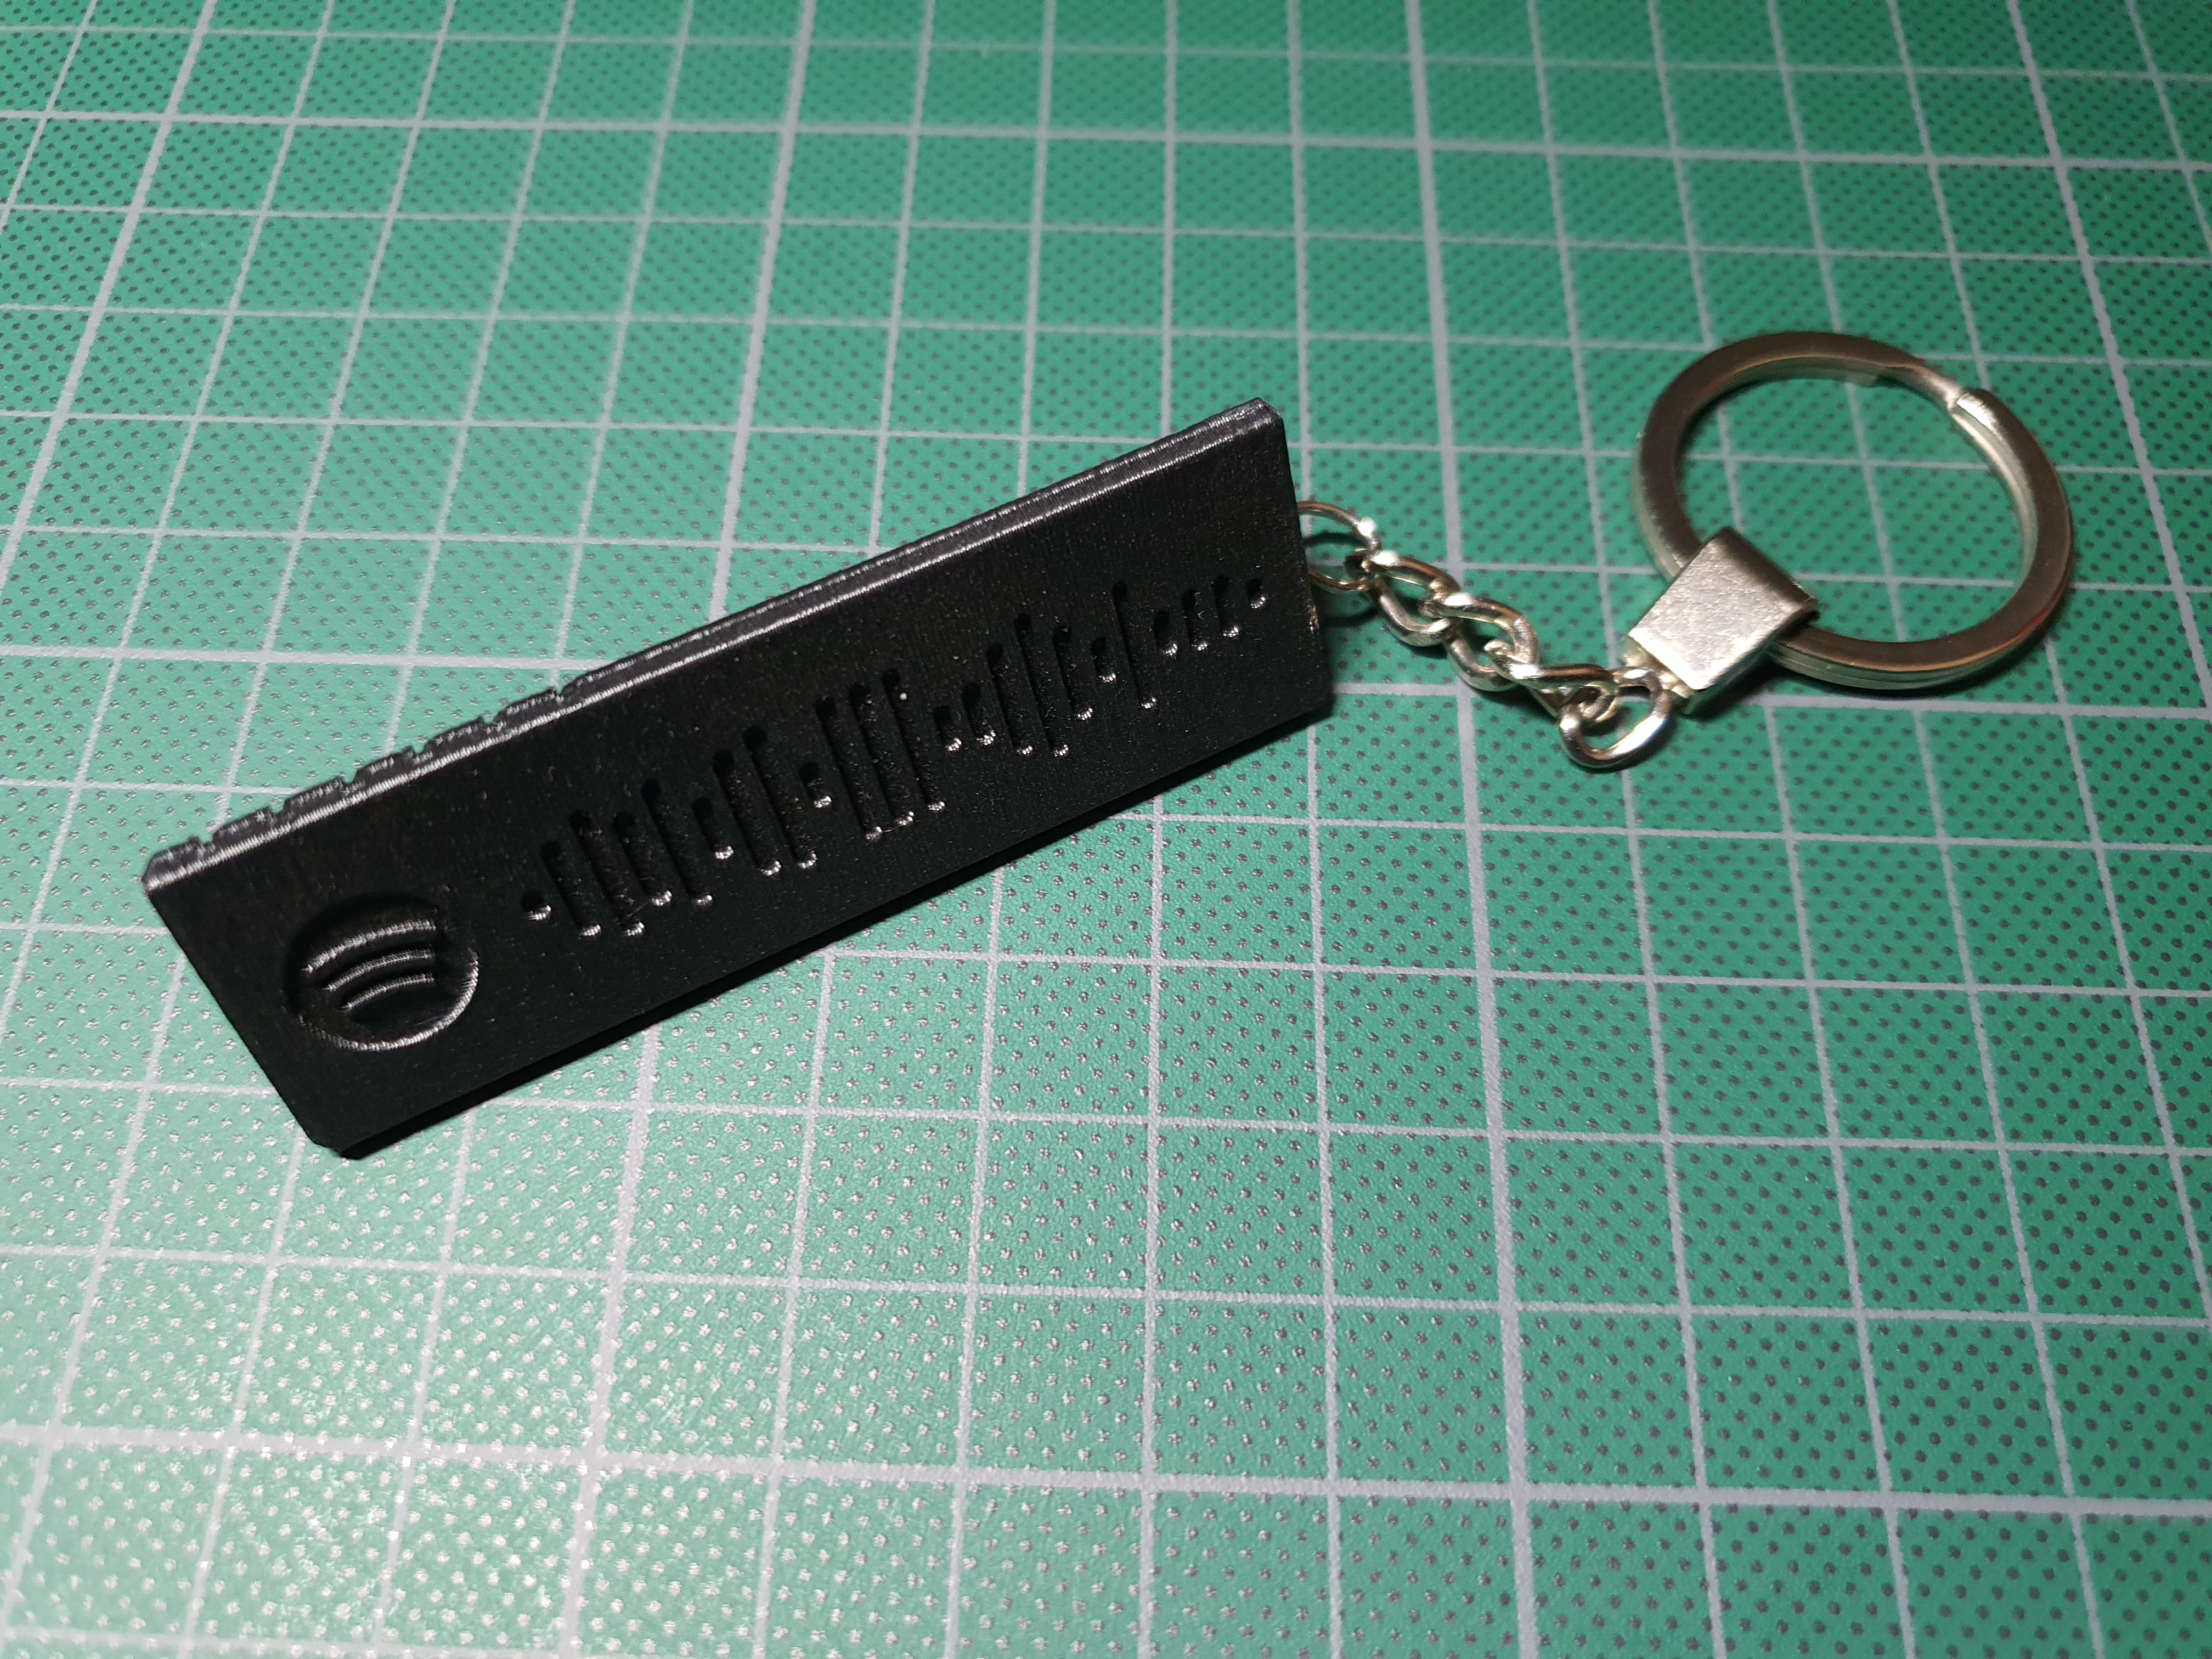 Spotify Keyring Inspired by The Fifth Element stones